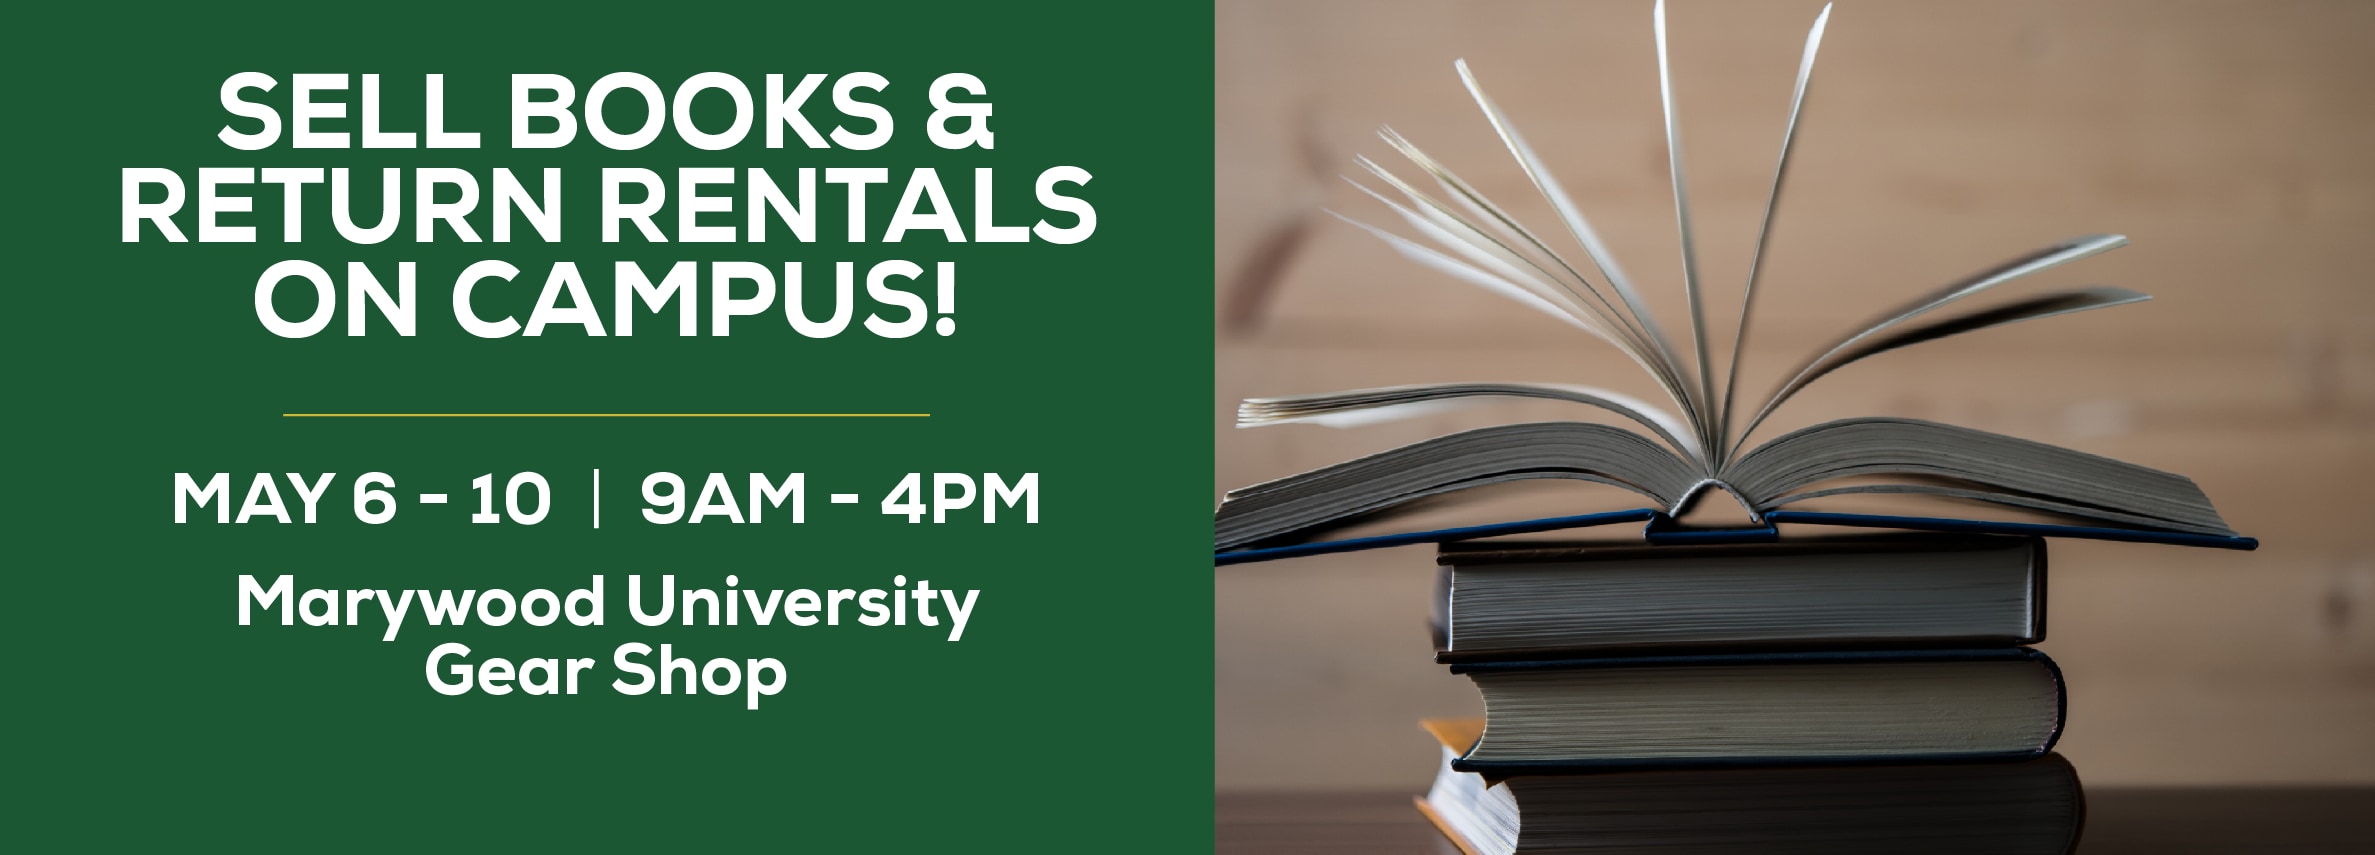 Sell books and return rentals on campus! May 6 - 10. 9am to 4pm at the Gear Shop.